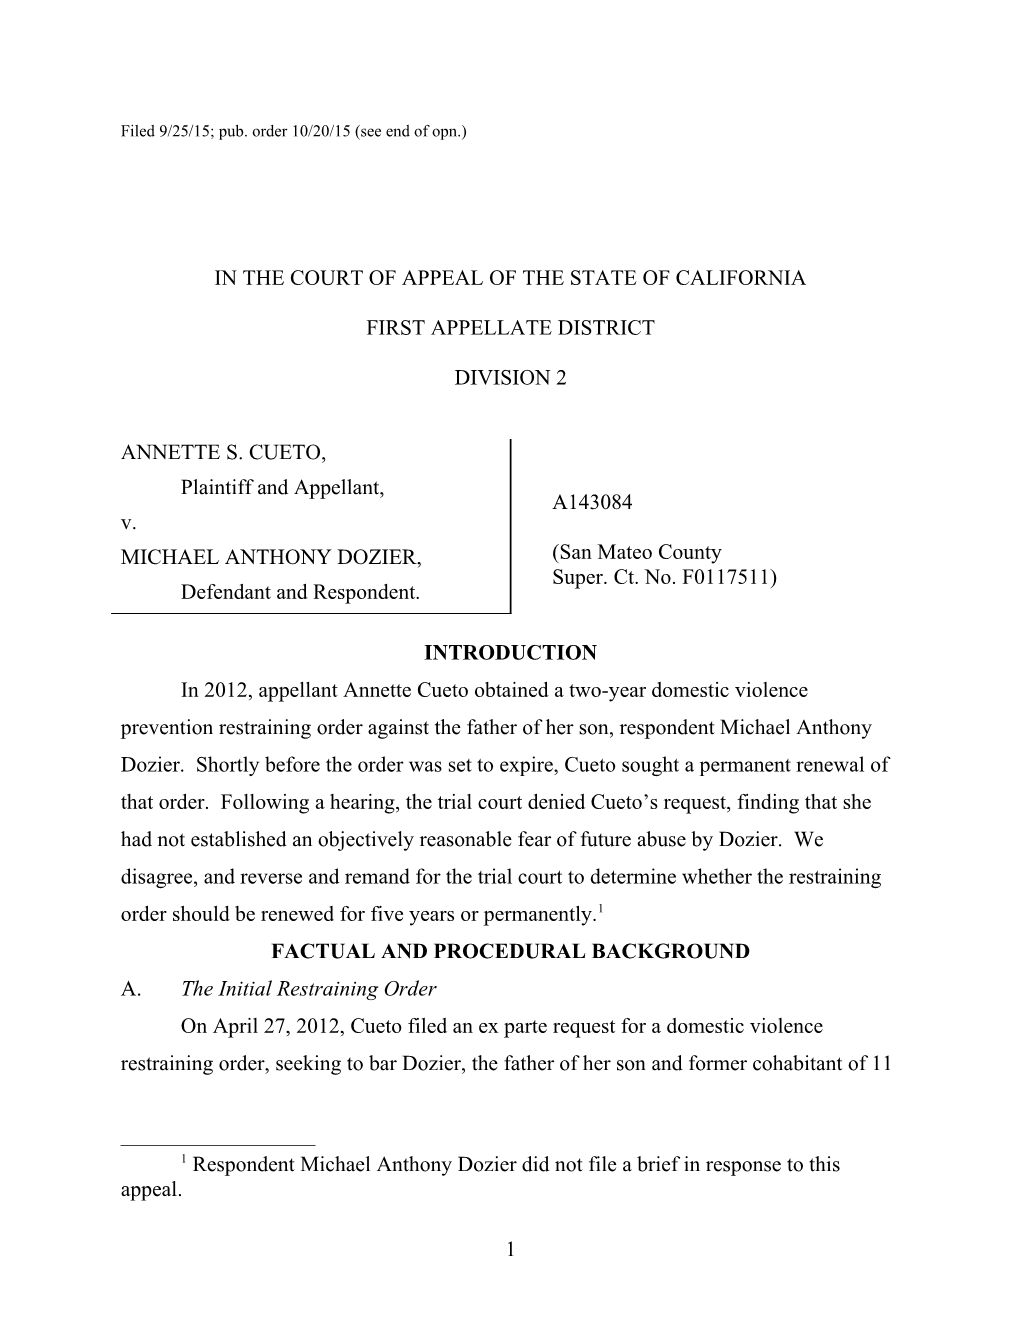 Filed 9/25/15; Pub. Order 10/20/15 (See End of Opn.)